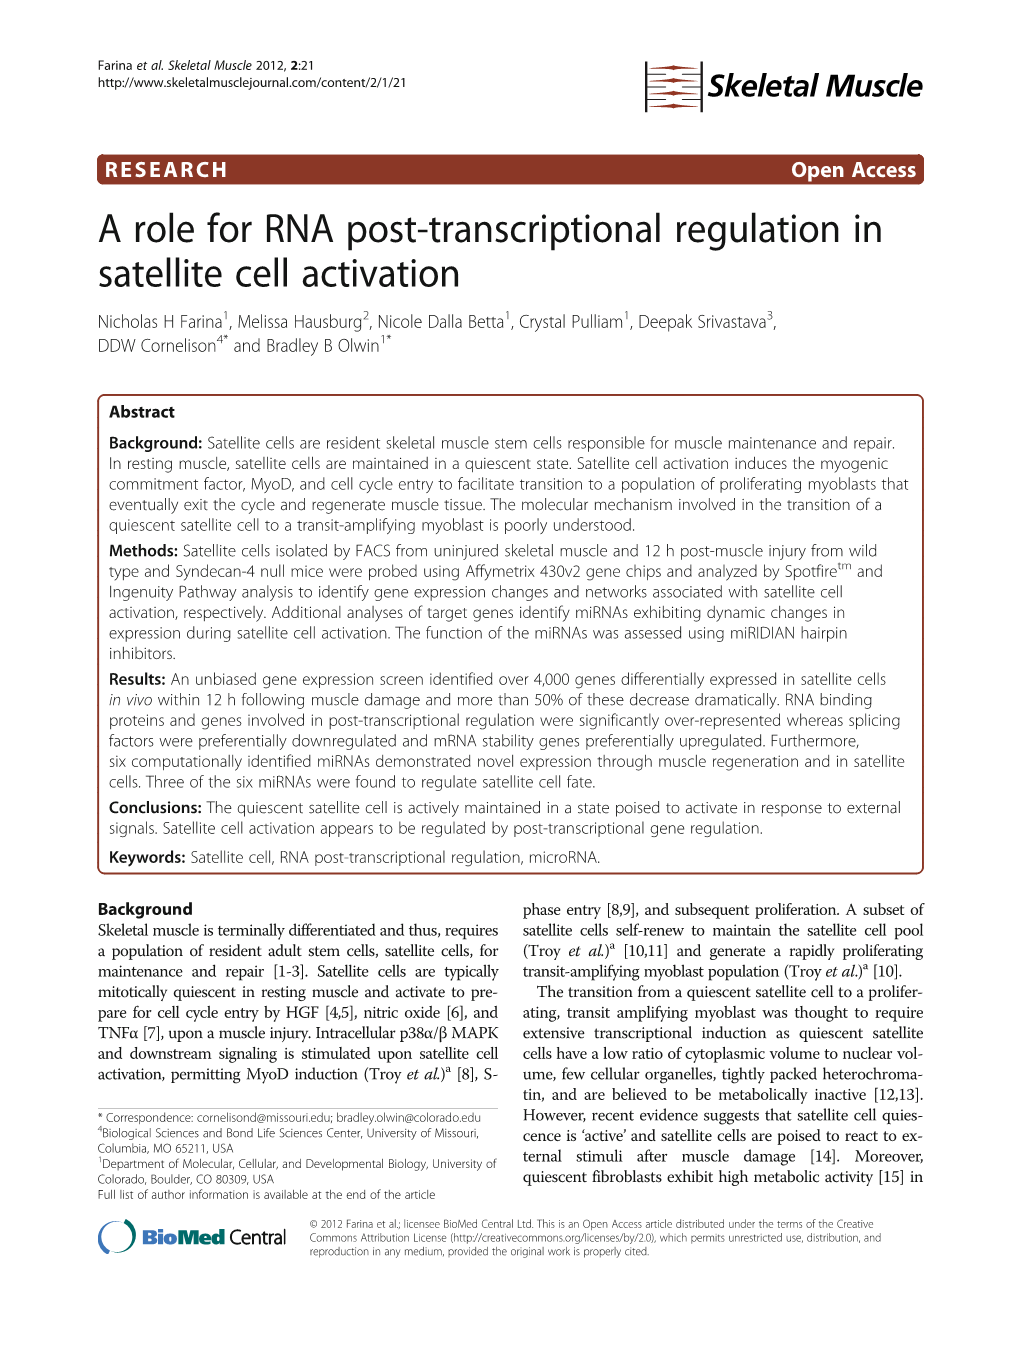 A Role for RNA Post-Transcriptional Regulation in Satellite Cell Activation